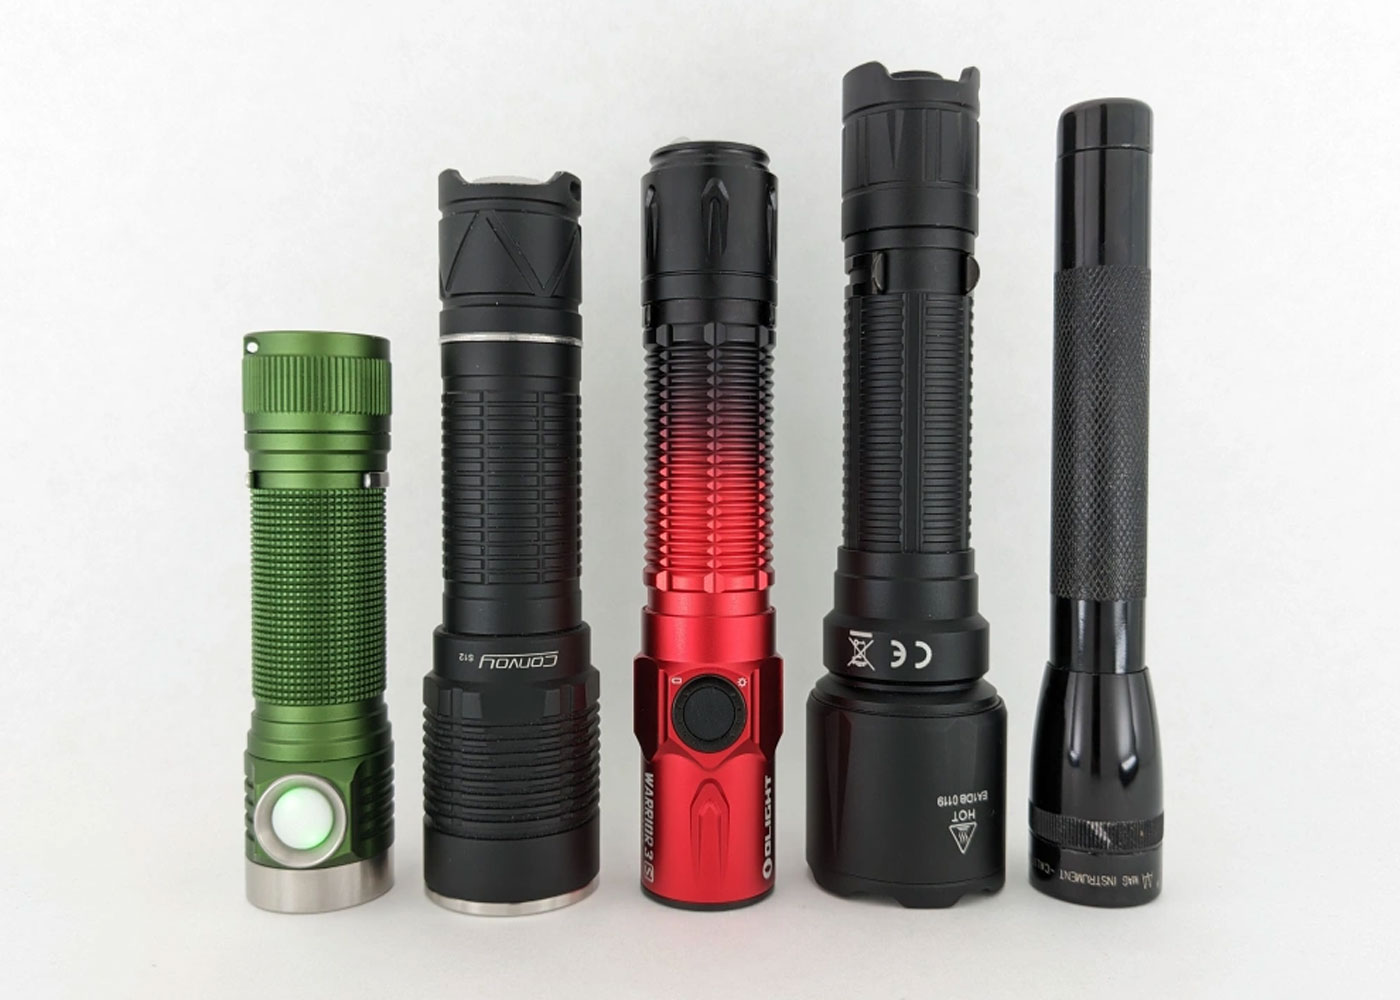 Warrior 3s Review - The High Beam Tactical Flashlight